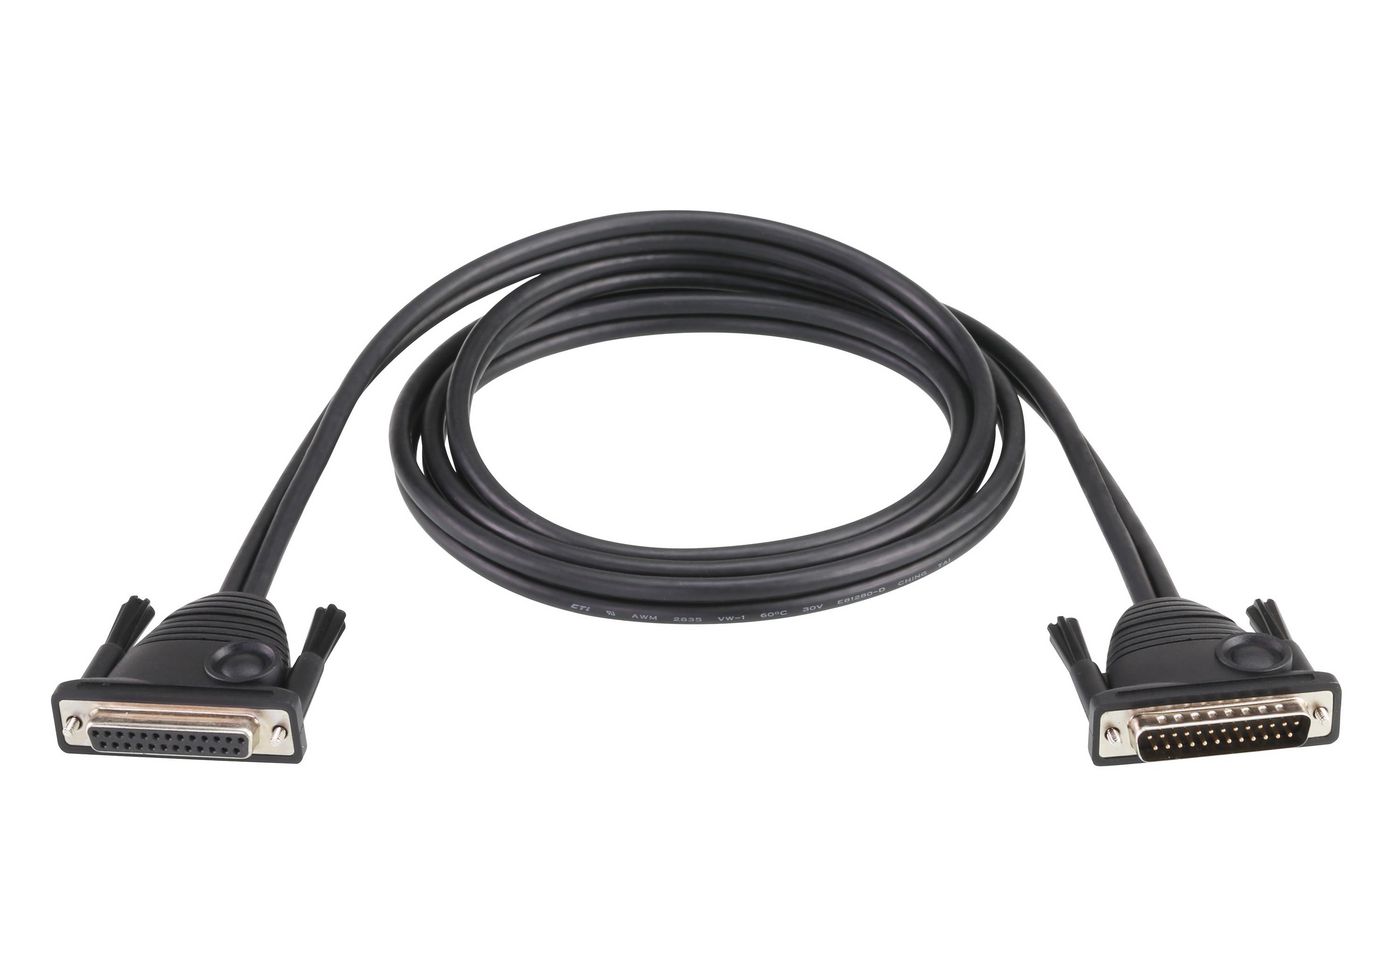 Aten 2L-2705 Daisy Cable for Cat 5 KVM 